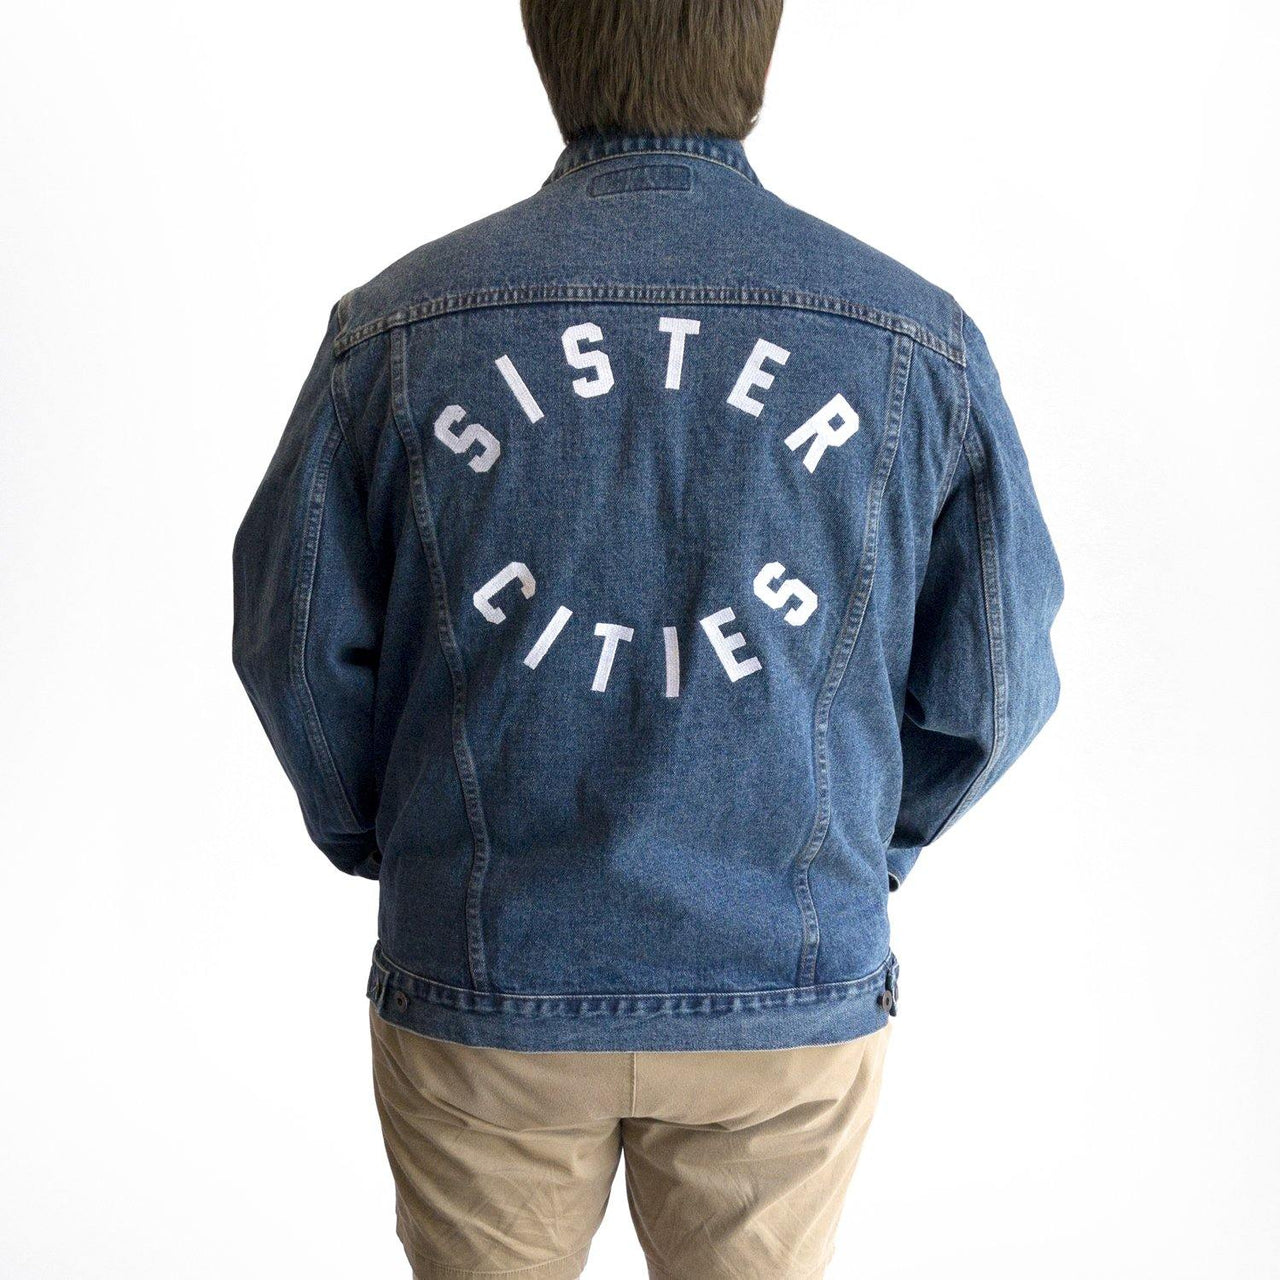 Buy – The Wonder Years "Sister Cities" Denim Jacket – Band & Music Merch – Cold Cuts Merch